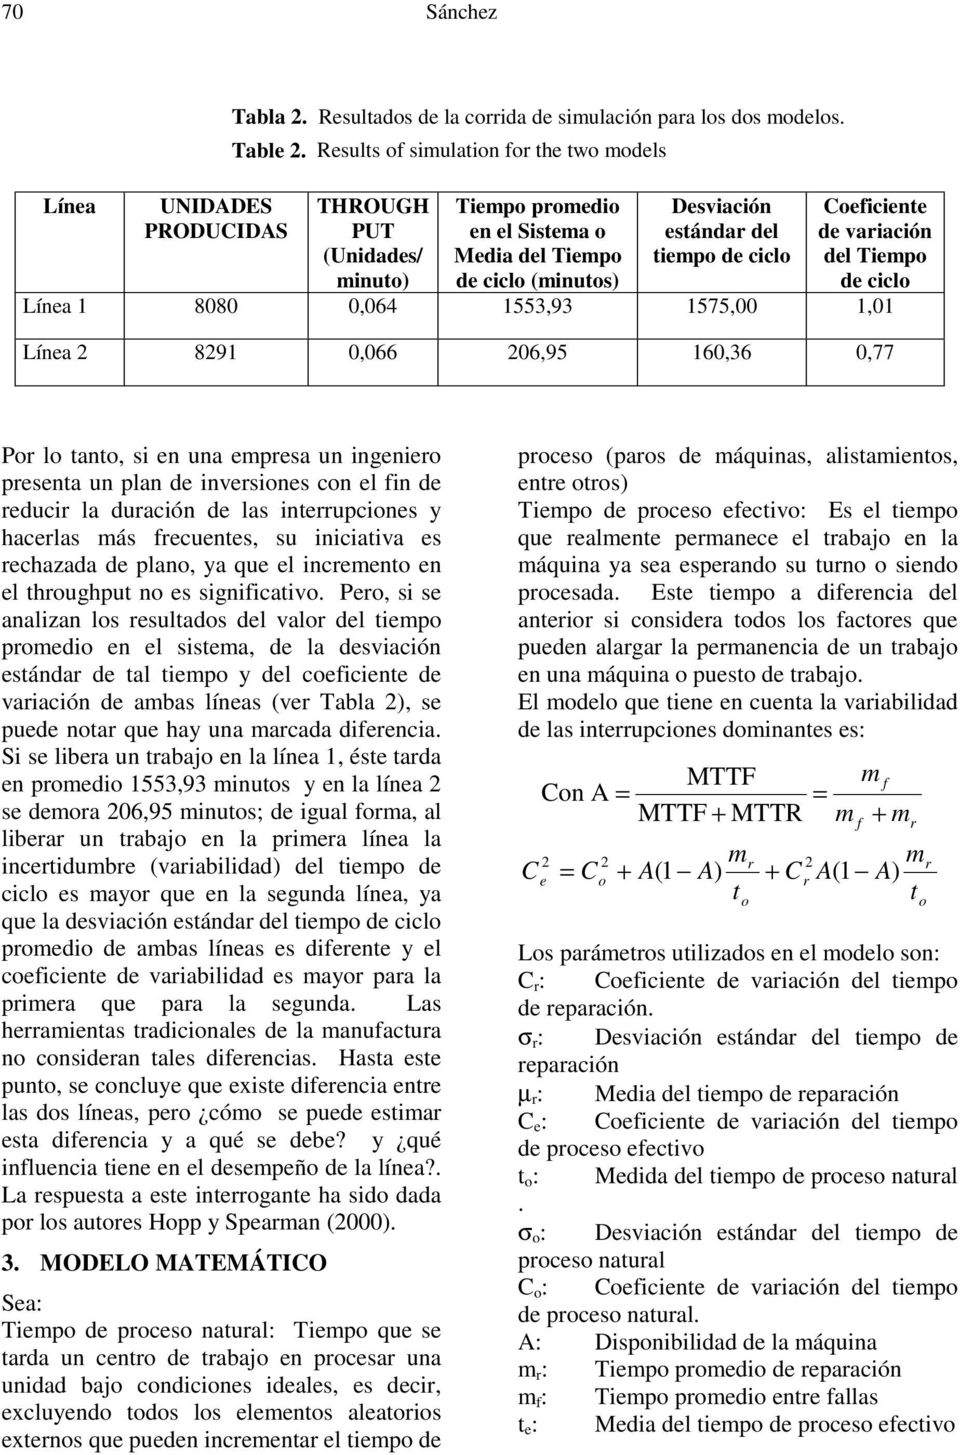 Rsults of simulation for th two modls THROUGH PUT (Unidads/ minuto) Timpo promdio n l Sistma o Mdia dl Timpo d ciclo (minutos) Dsviación stándar dl timpo d ciclo Coficint d variación dl Timpo d ciclo